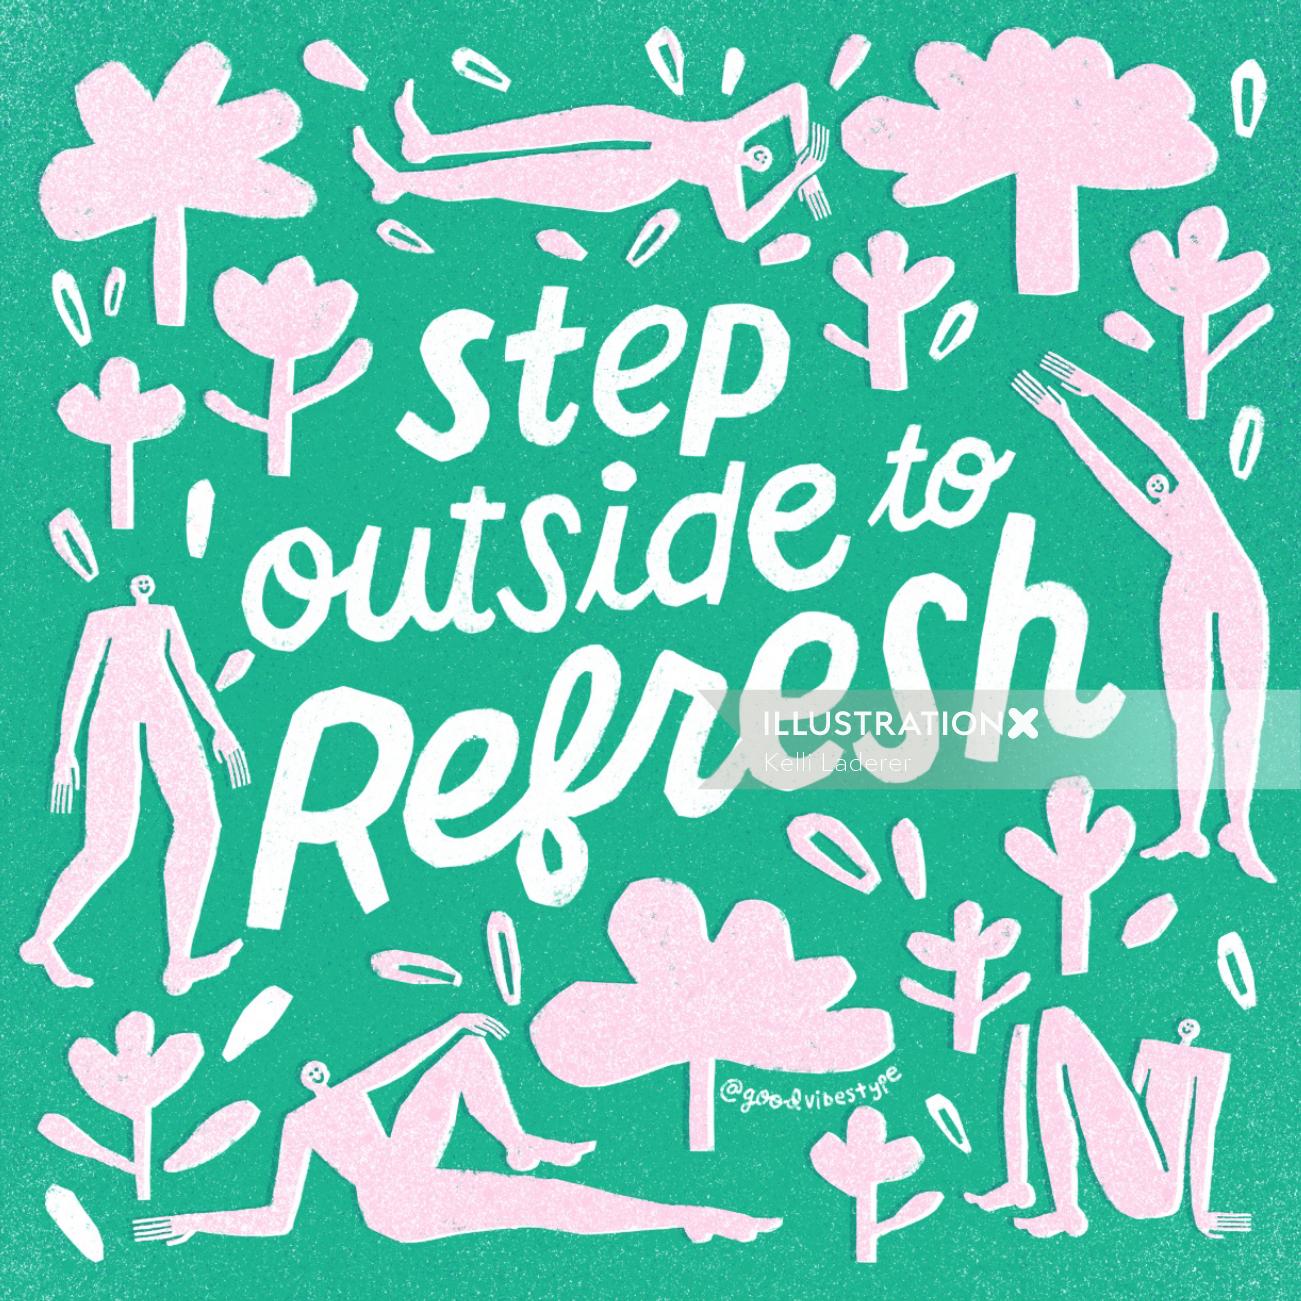 Step outside to refresh